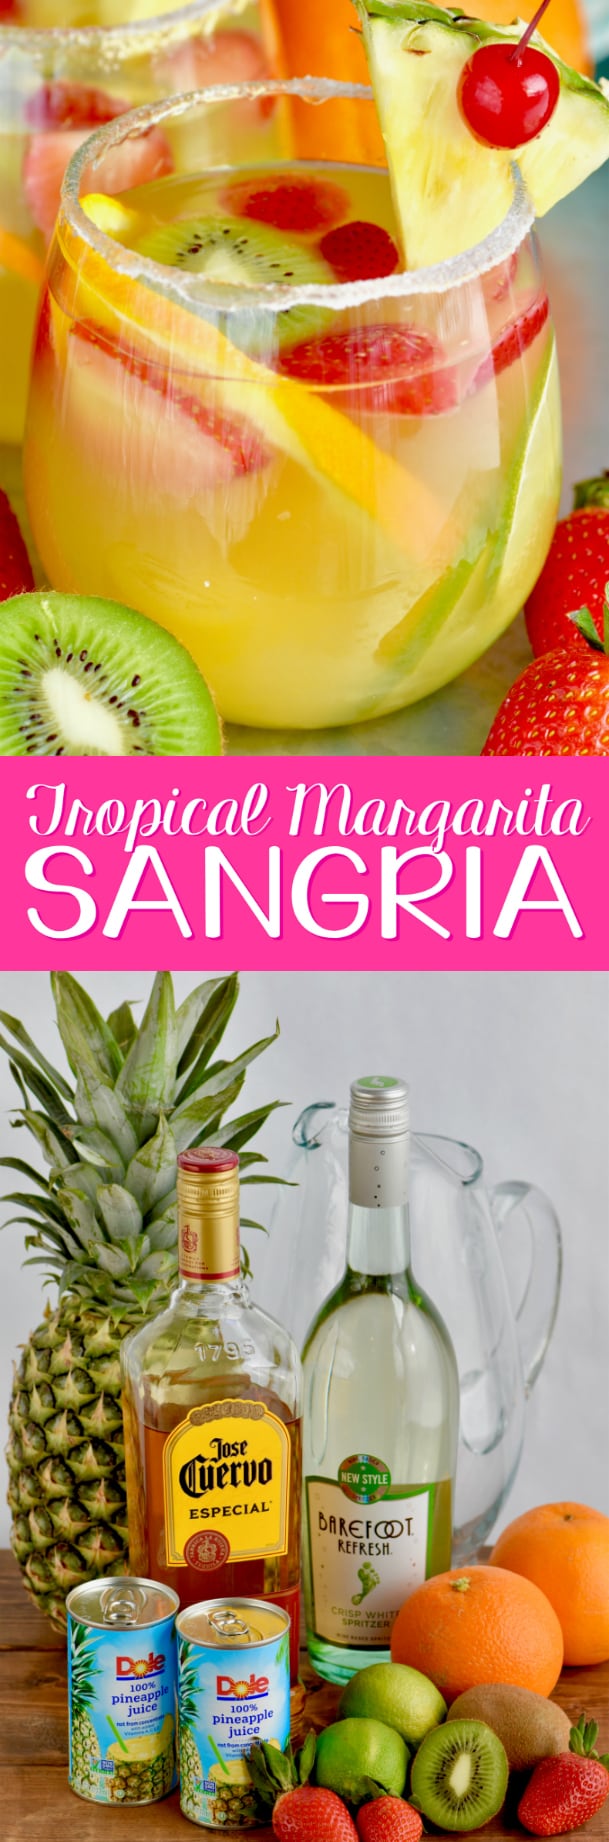 This Tropical Margarita Sangria recipe starts with white wine and then some simple ingredients. This easy cocktail is a fun twist on a traditional sangria recipe.